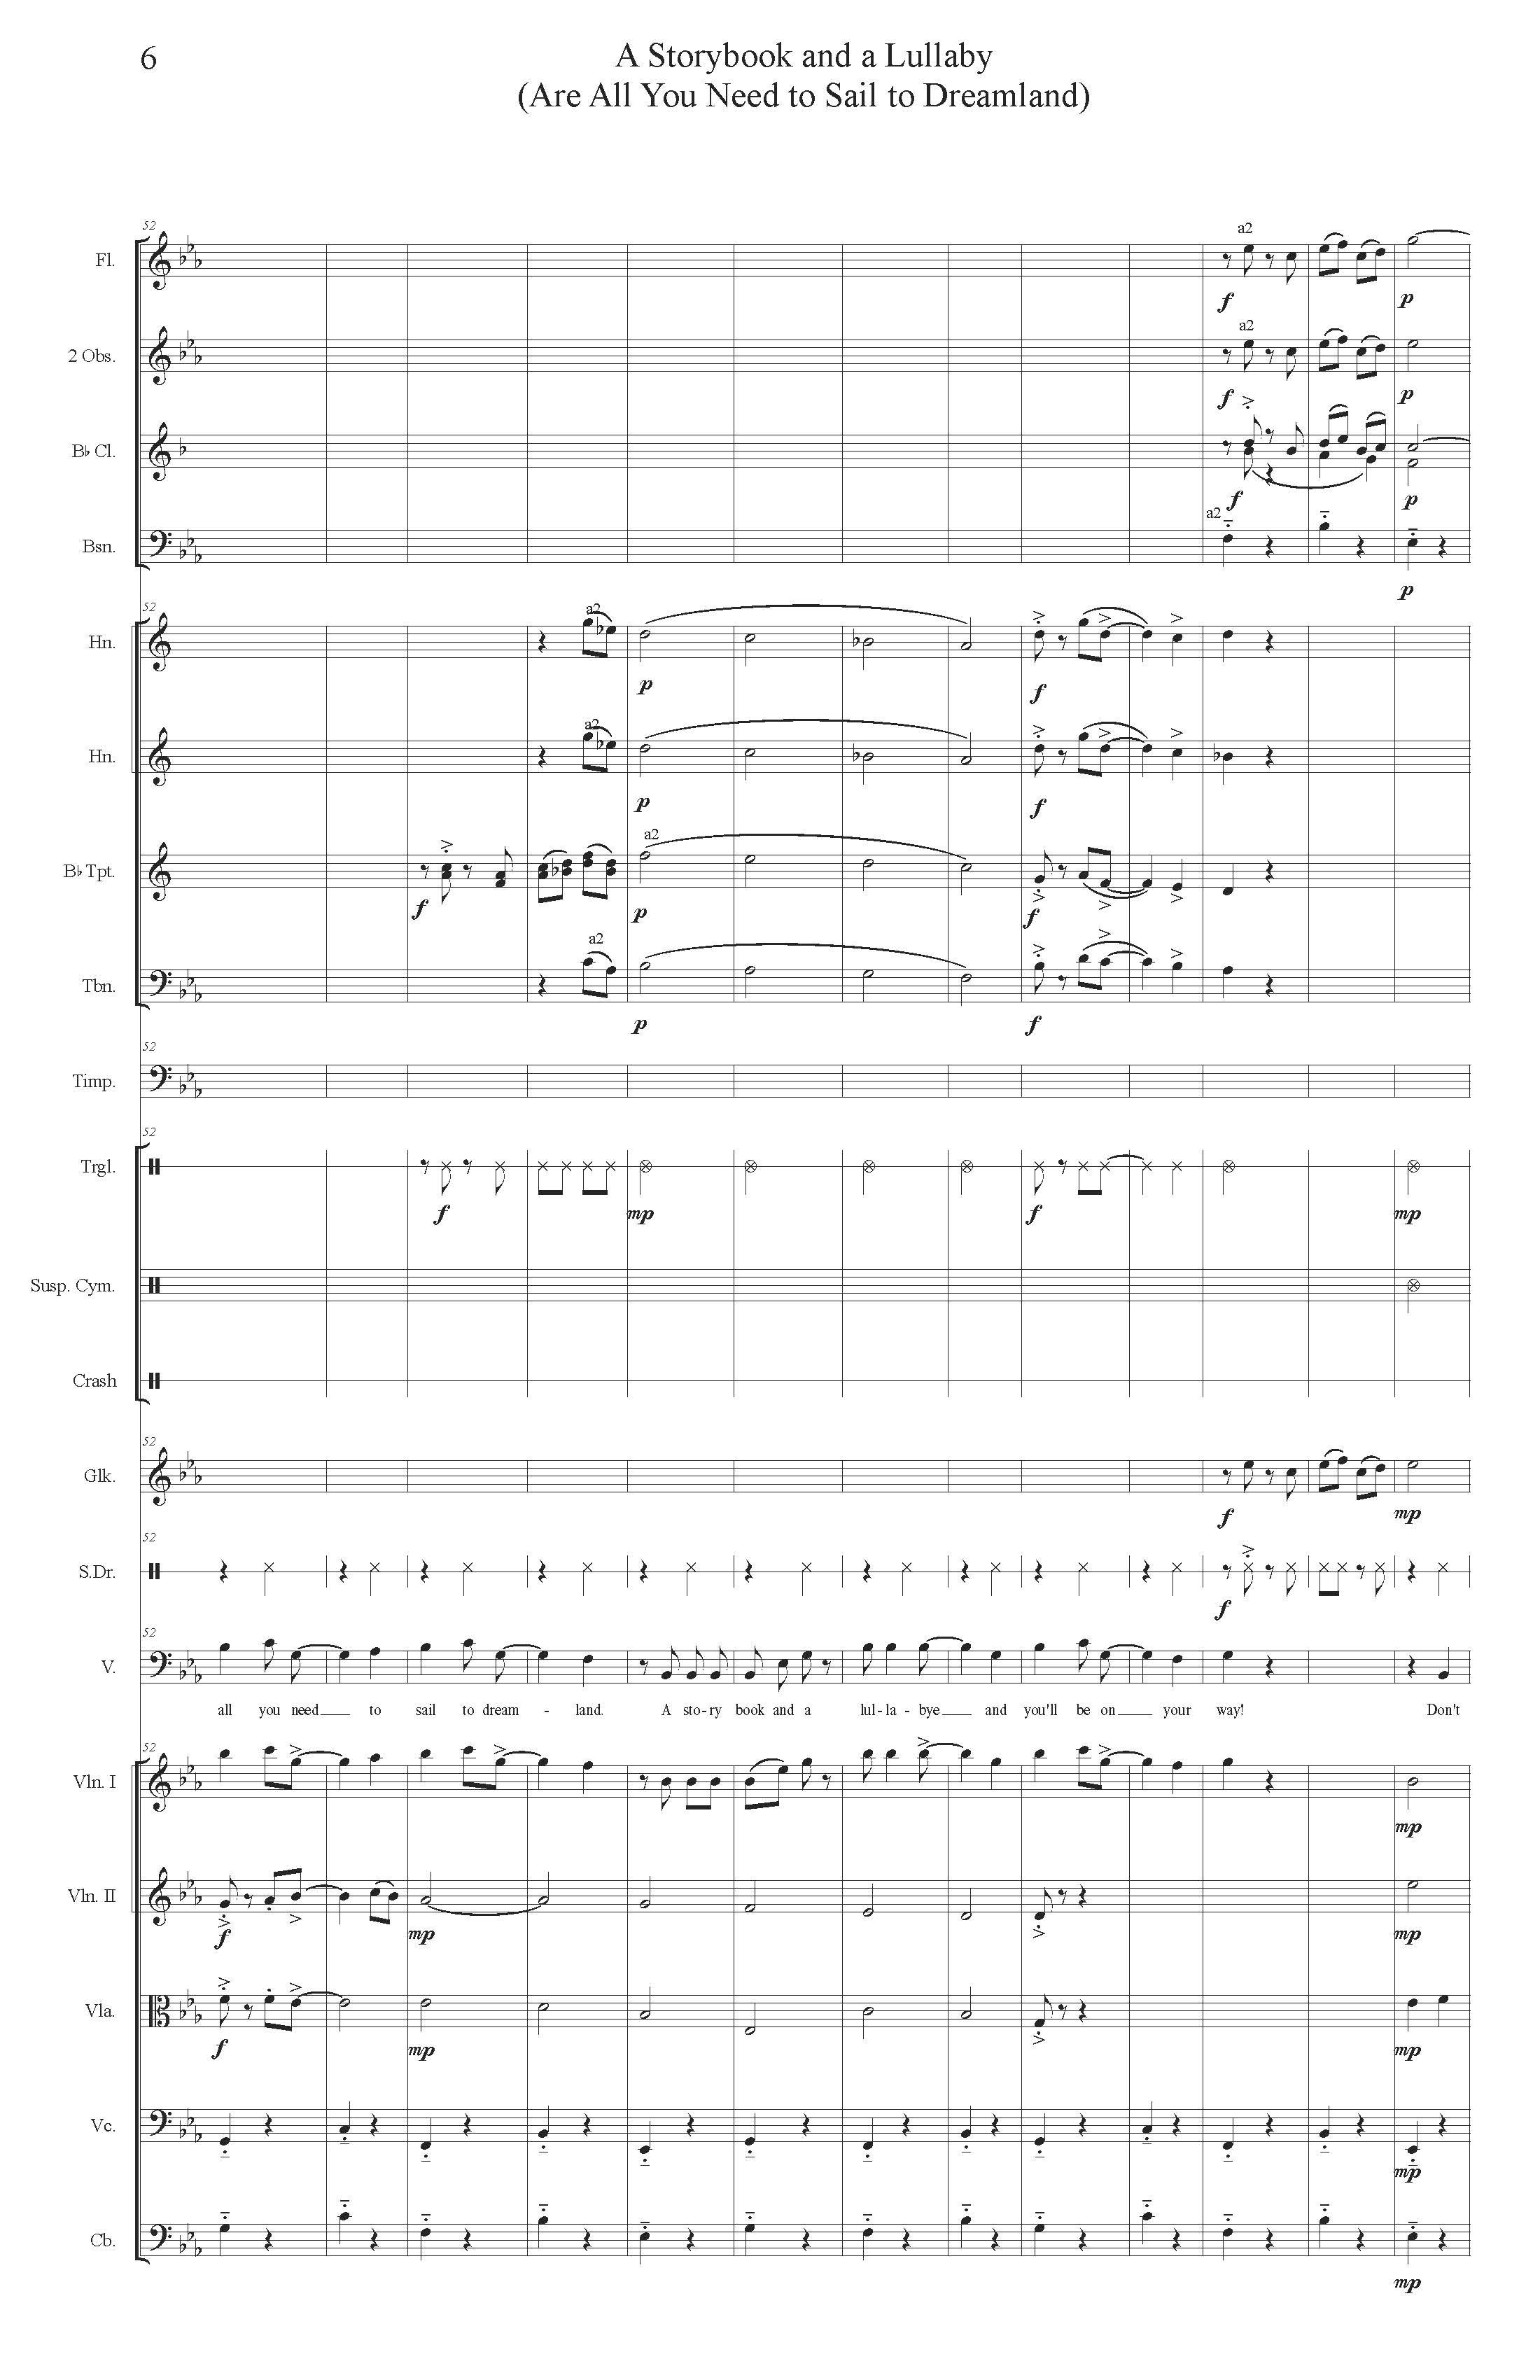 A STORYBOOK AND A LULLABY ORCH - Score_Page_06.jpg